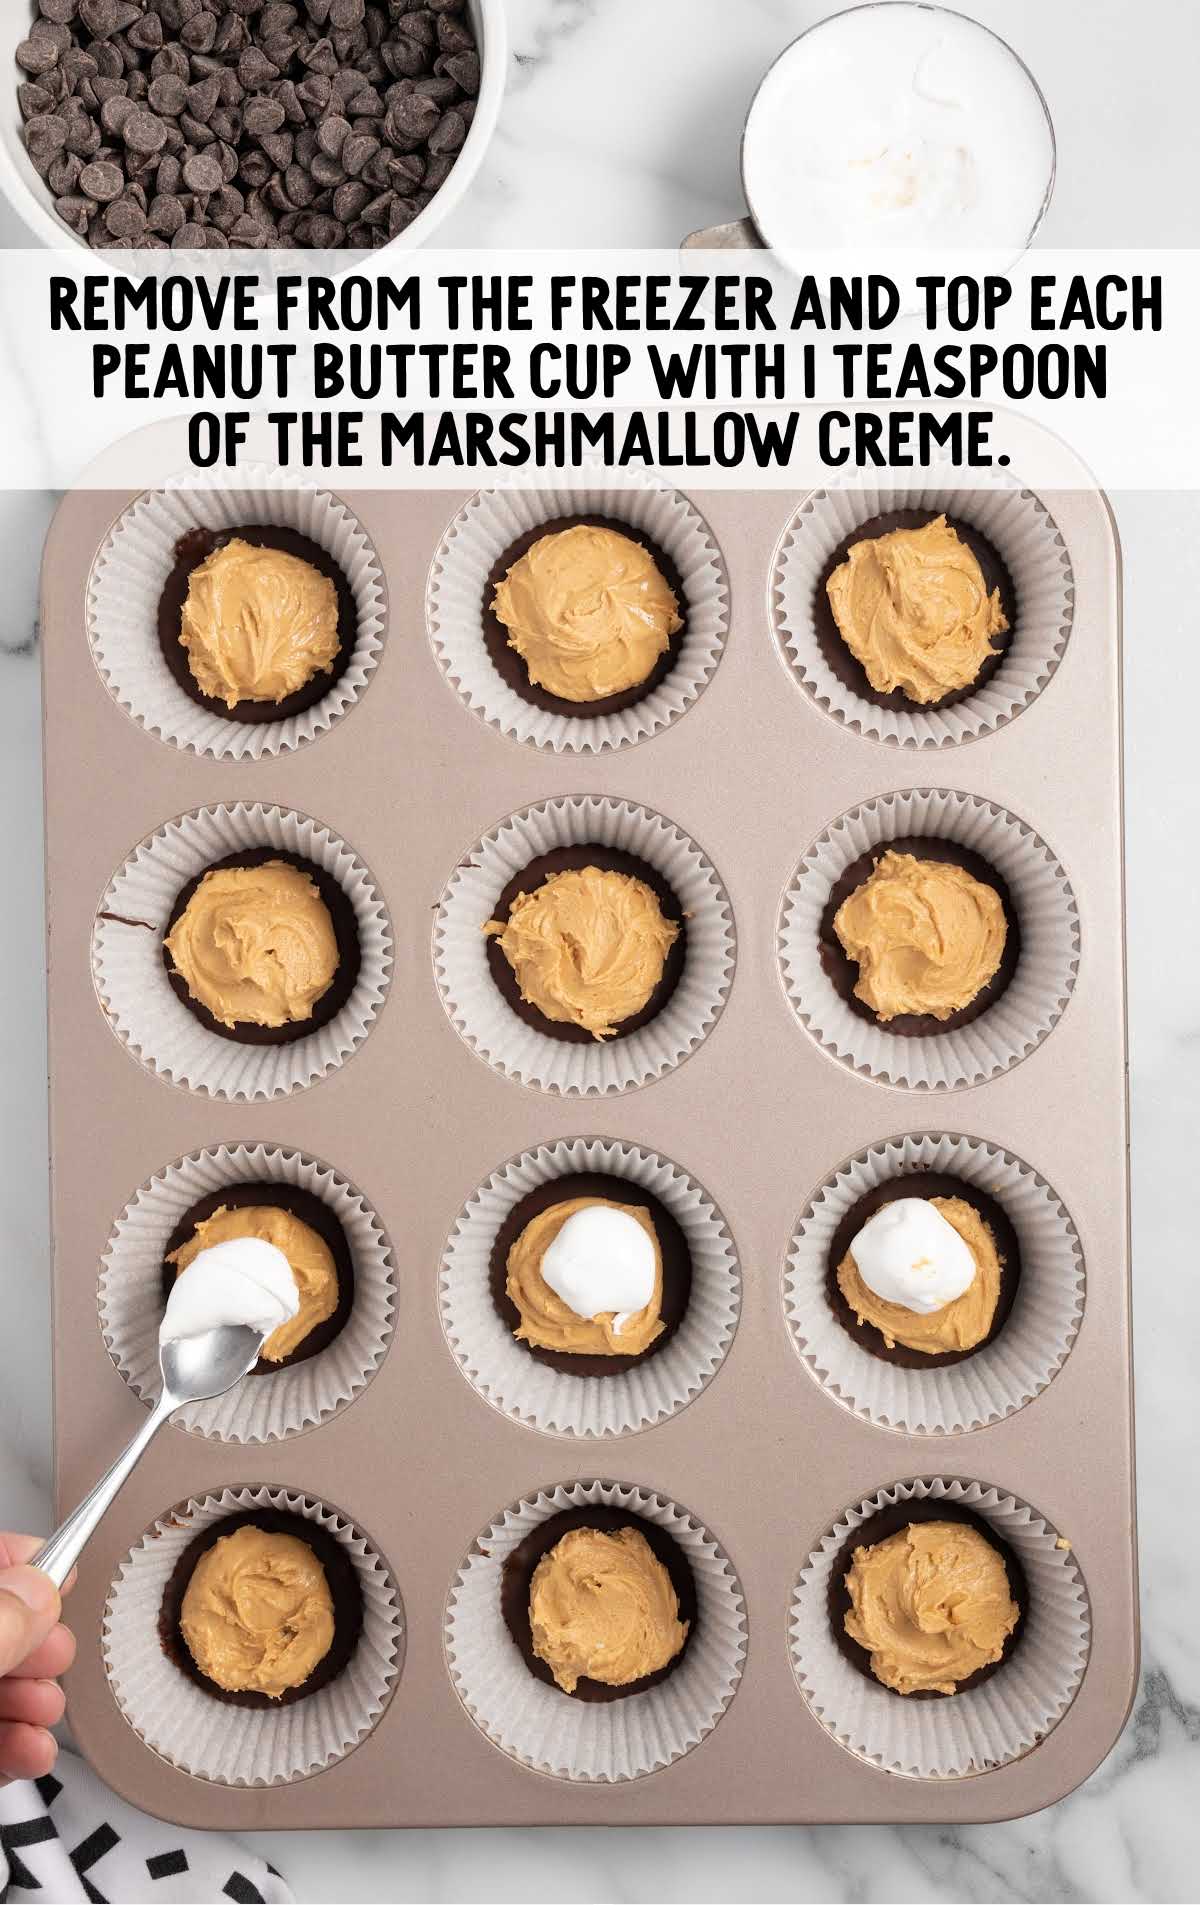 peanut butter cups topped with marshmallow creme